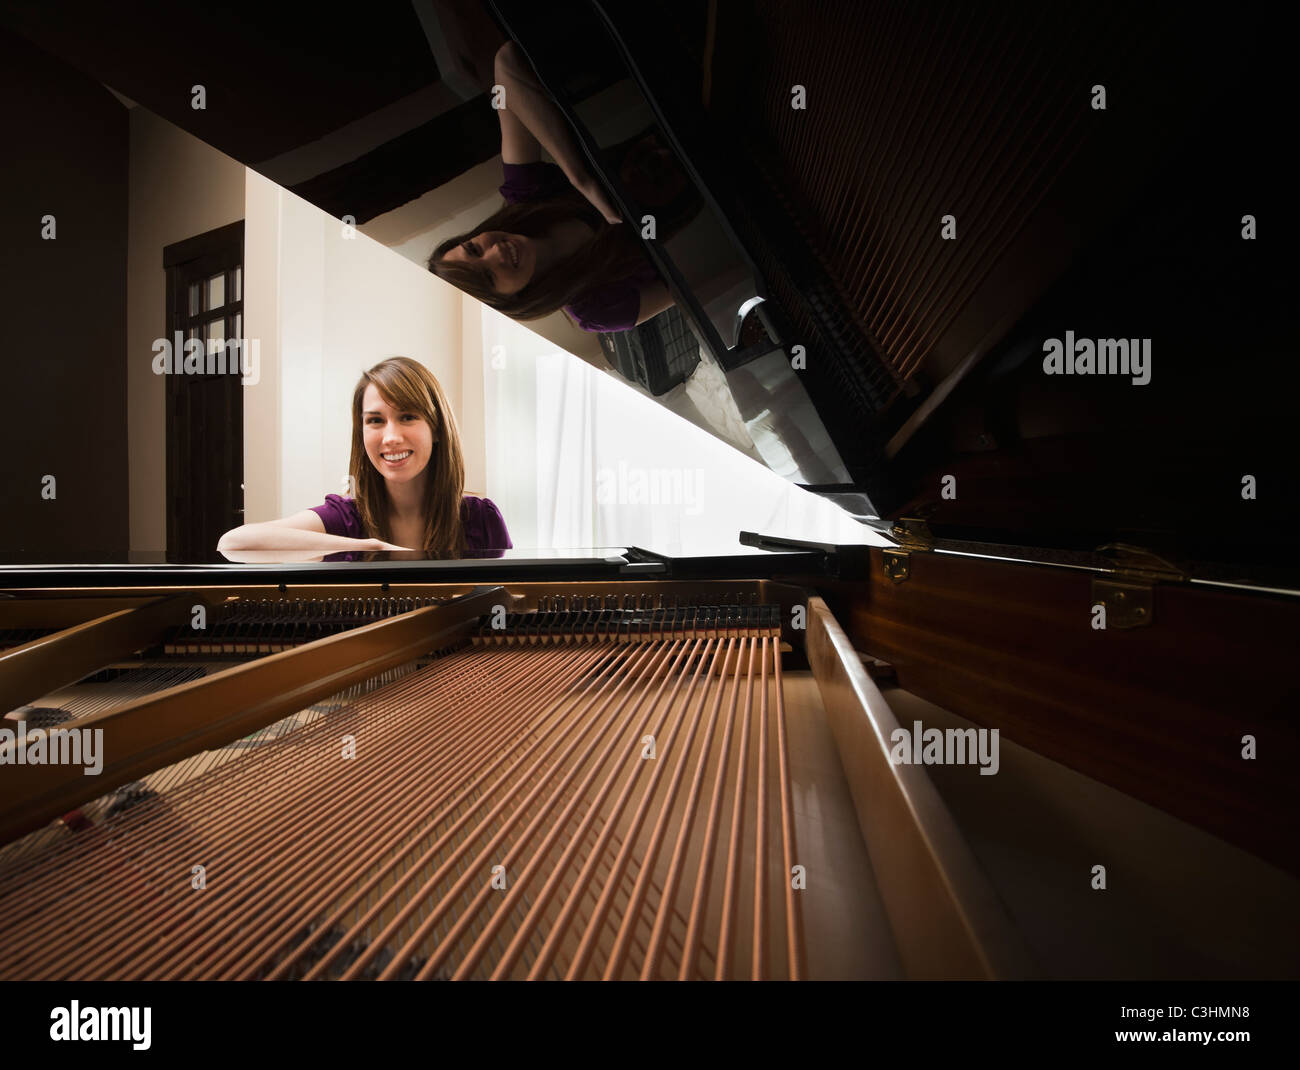 Portrait of young pianist sitting by grand piano Stock Photo